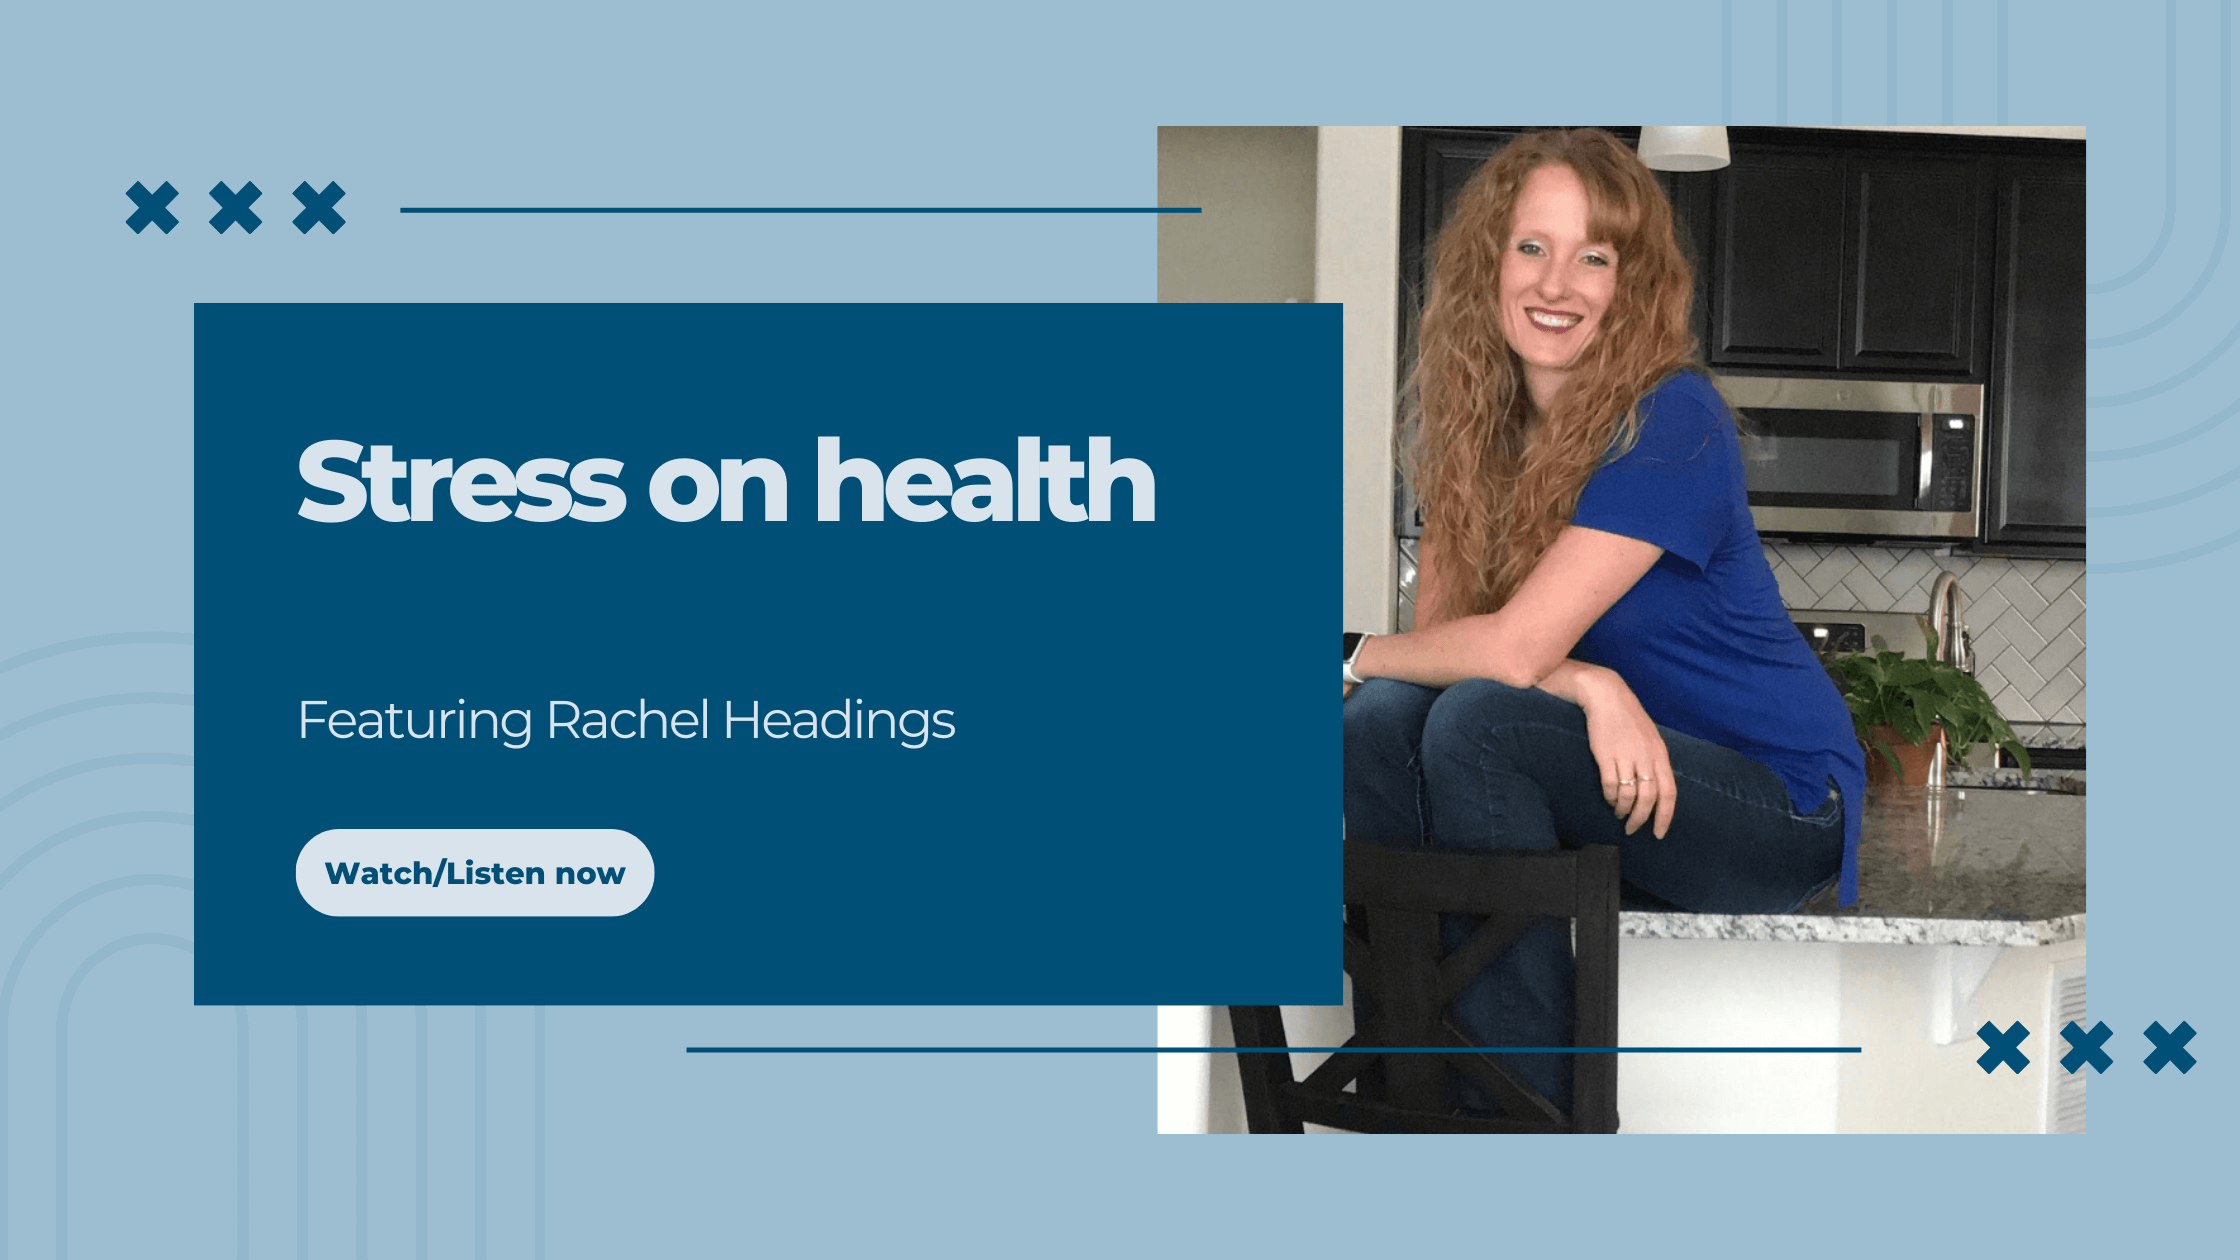 Holistic Health Bites podcast with Functional Nutritionist Andrea Nicholson featuring Rachel Headings discussing underlying stressors